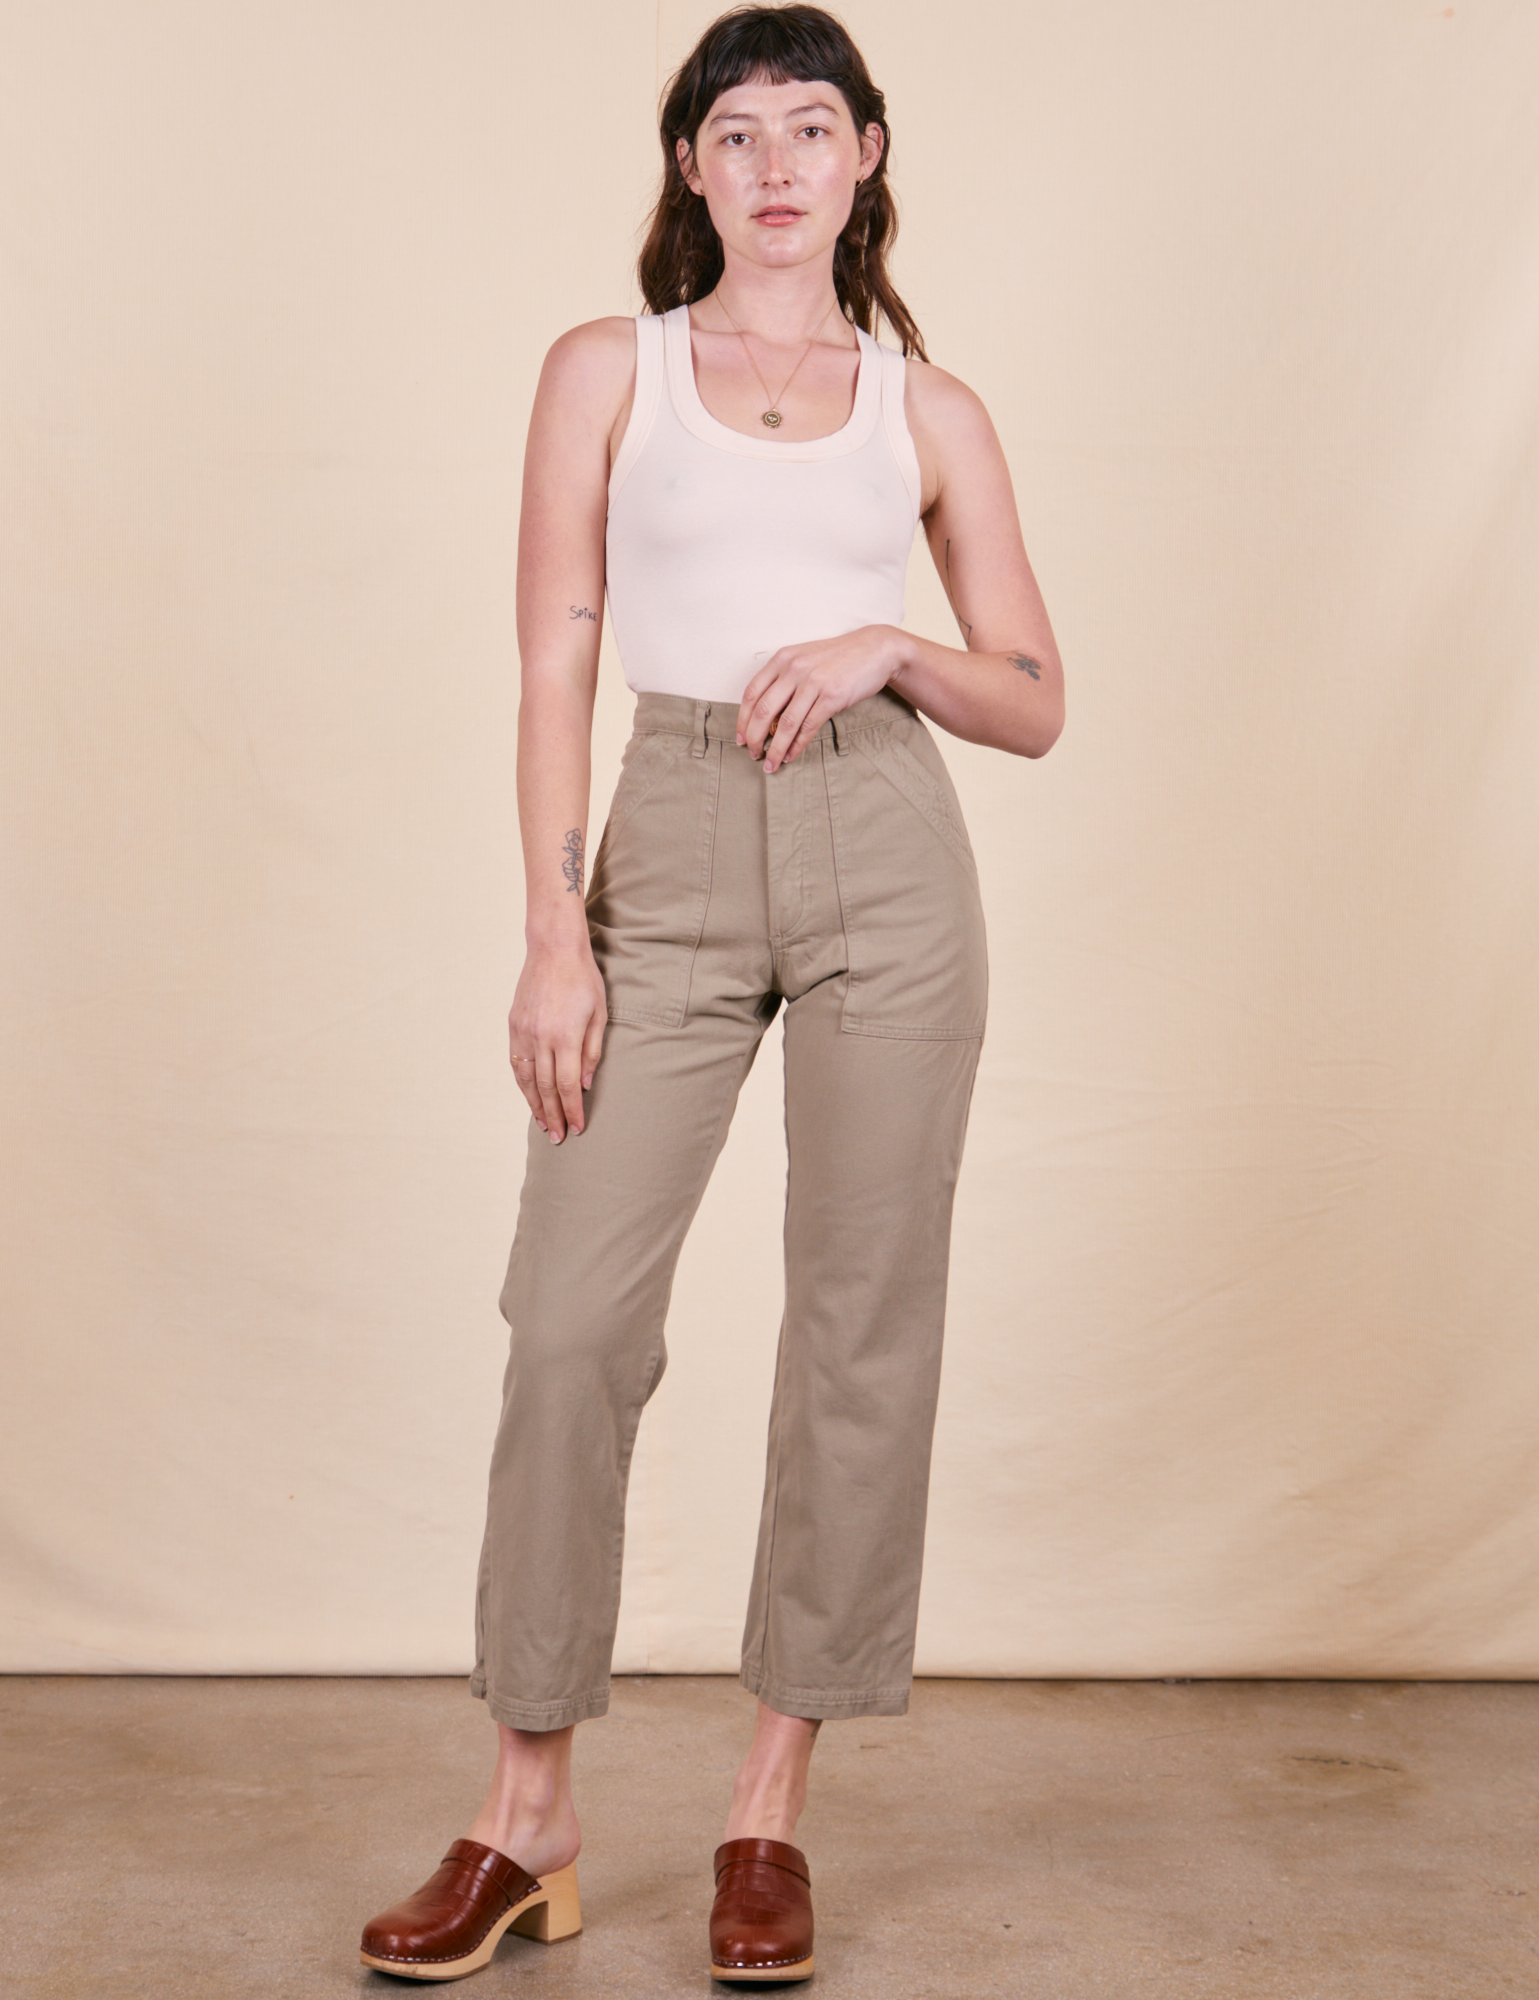 Alex is 5'8" and wearing XS Work Pants in Khaki Grey paired with vintage off-white Tank Top